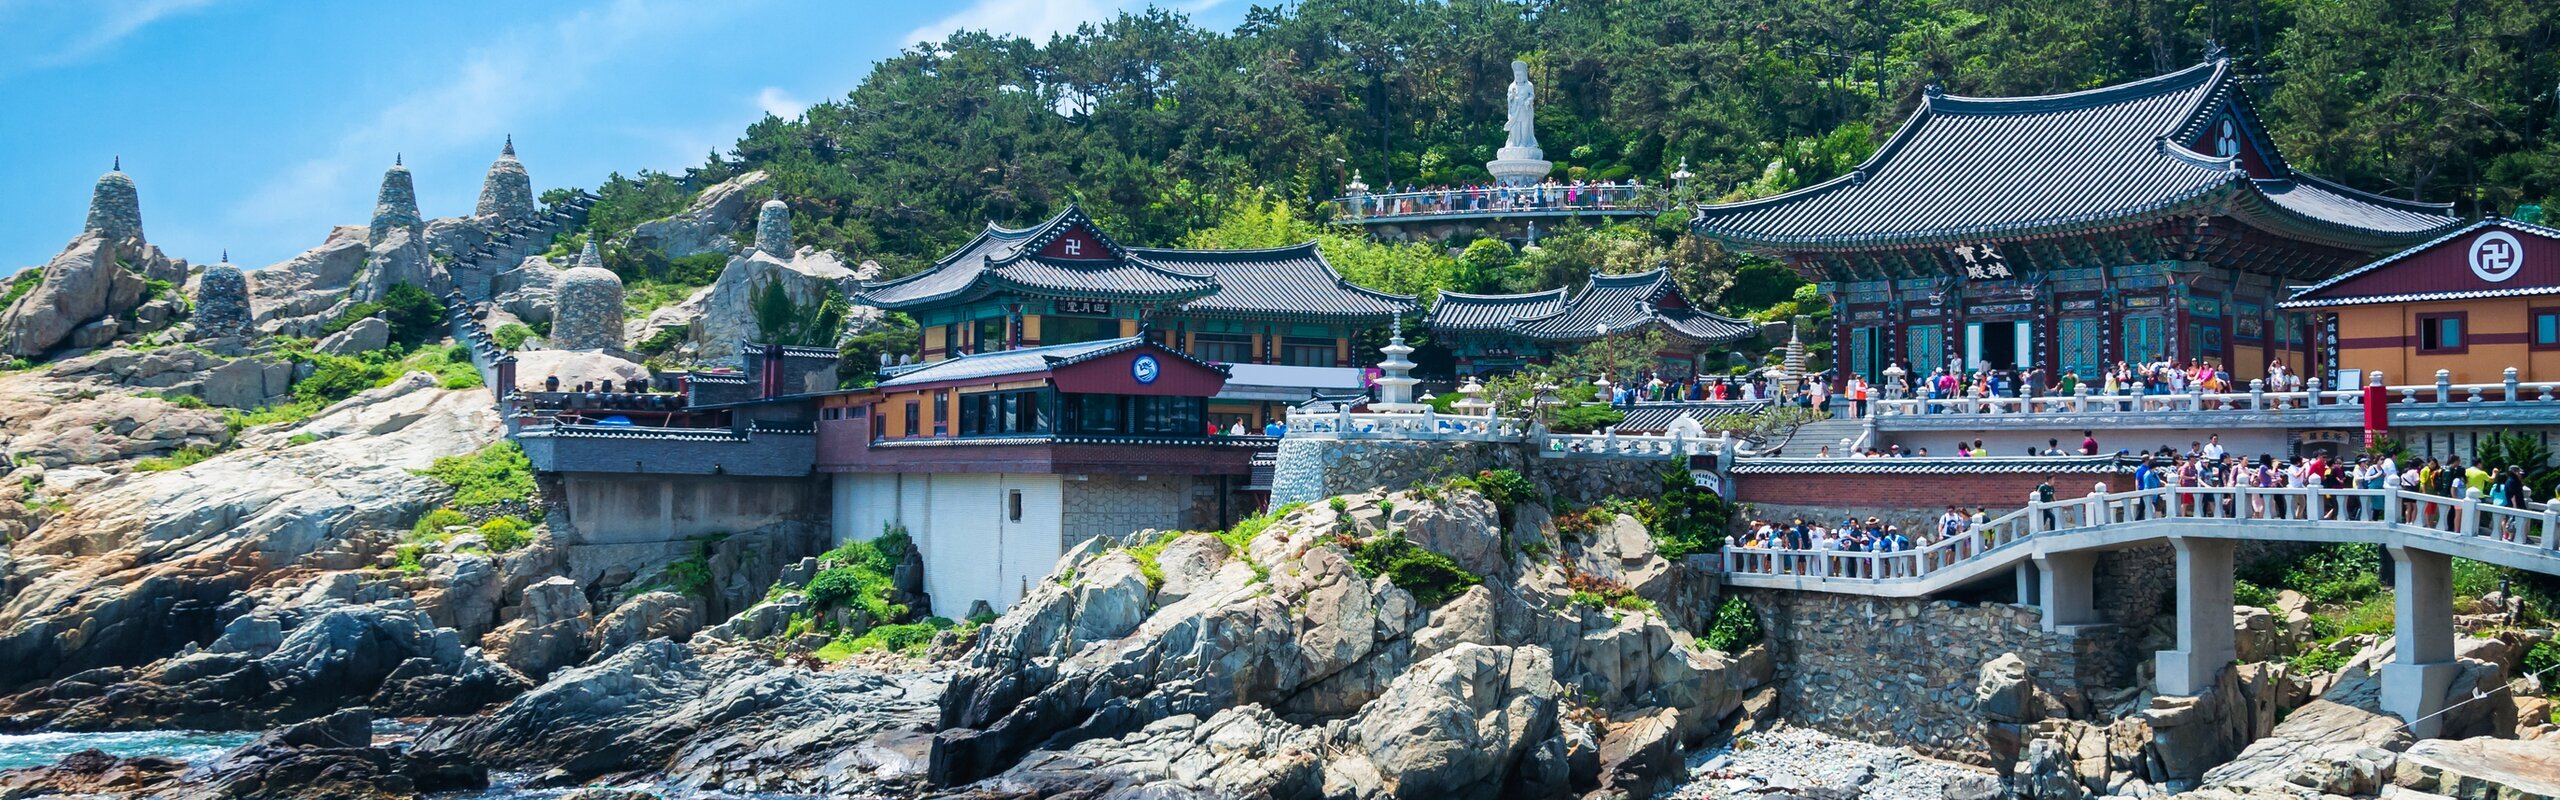 8-Day South Korea Tour to Visit Highlights of Seoul, Busan and Jeju